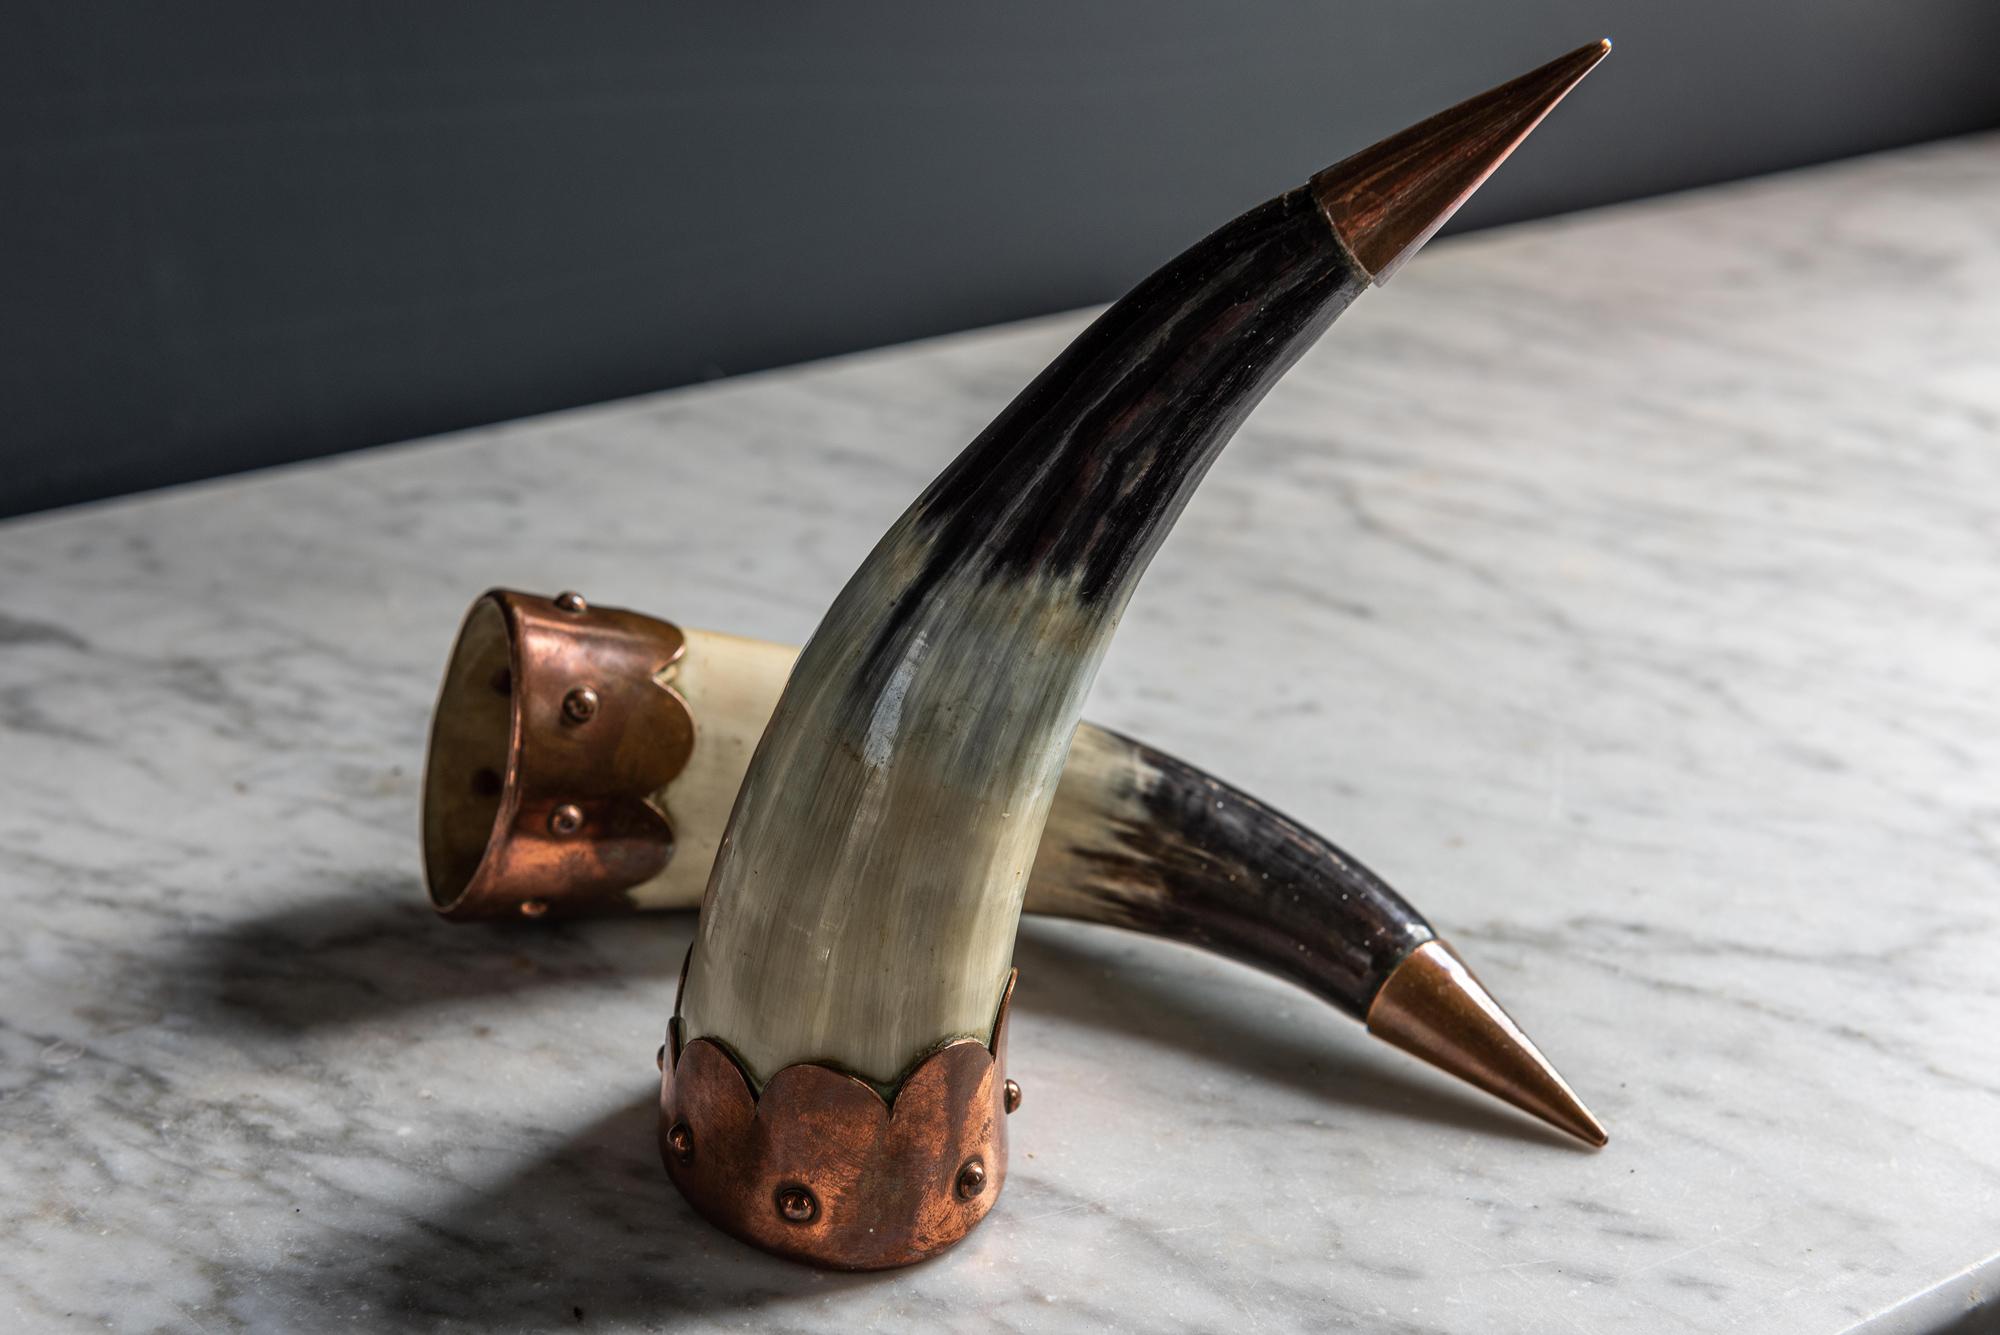 Pair of Arts & Crafts drinking horns, late 19th century.
Decorative horns with riveted copper bands and tips.

Measures: H 22, D 3 cm, W 3 cm.

   